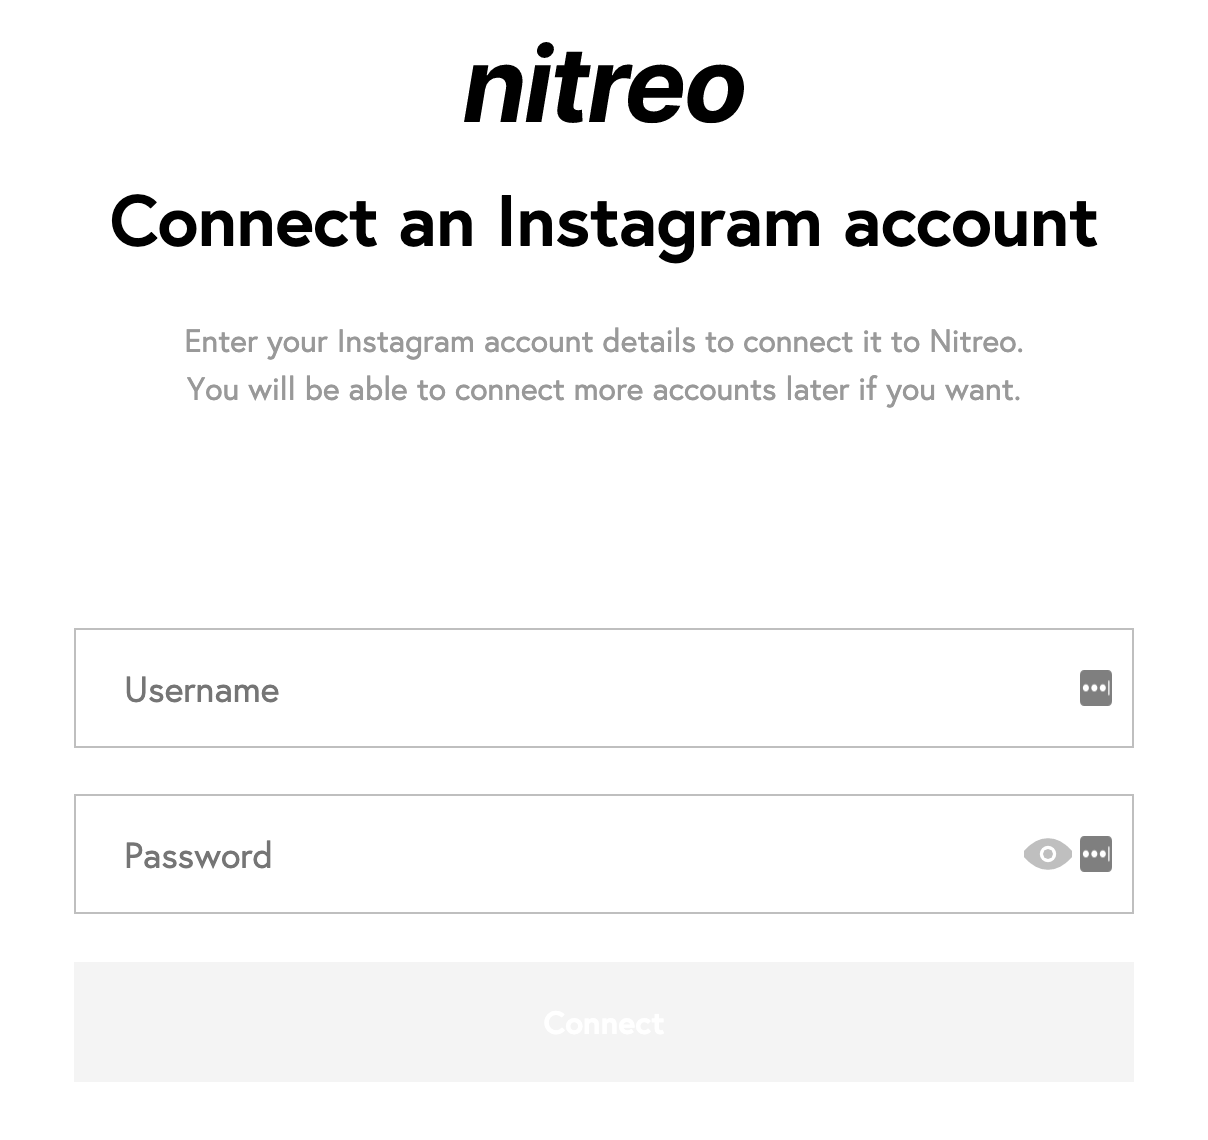 nitreo form to connect an Instagram account